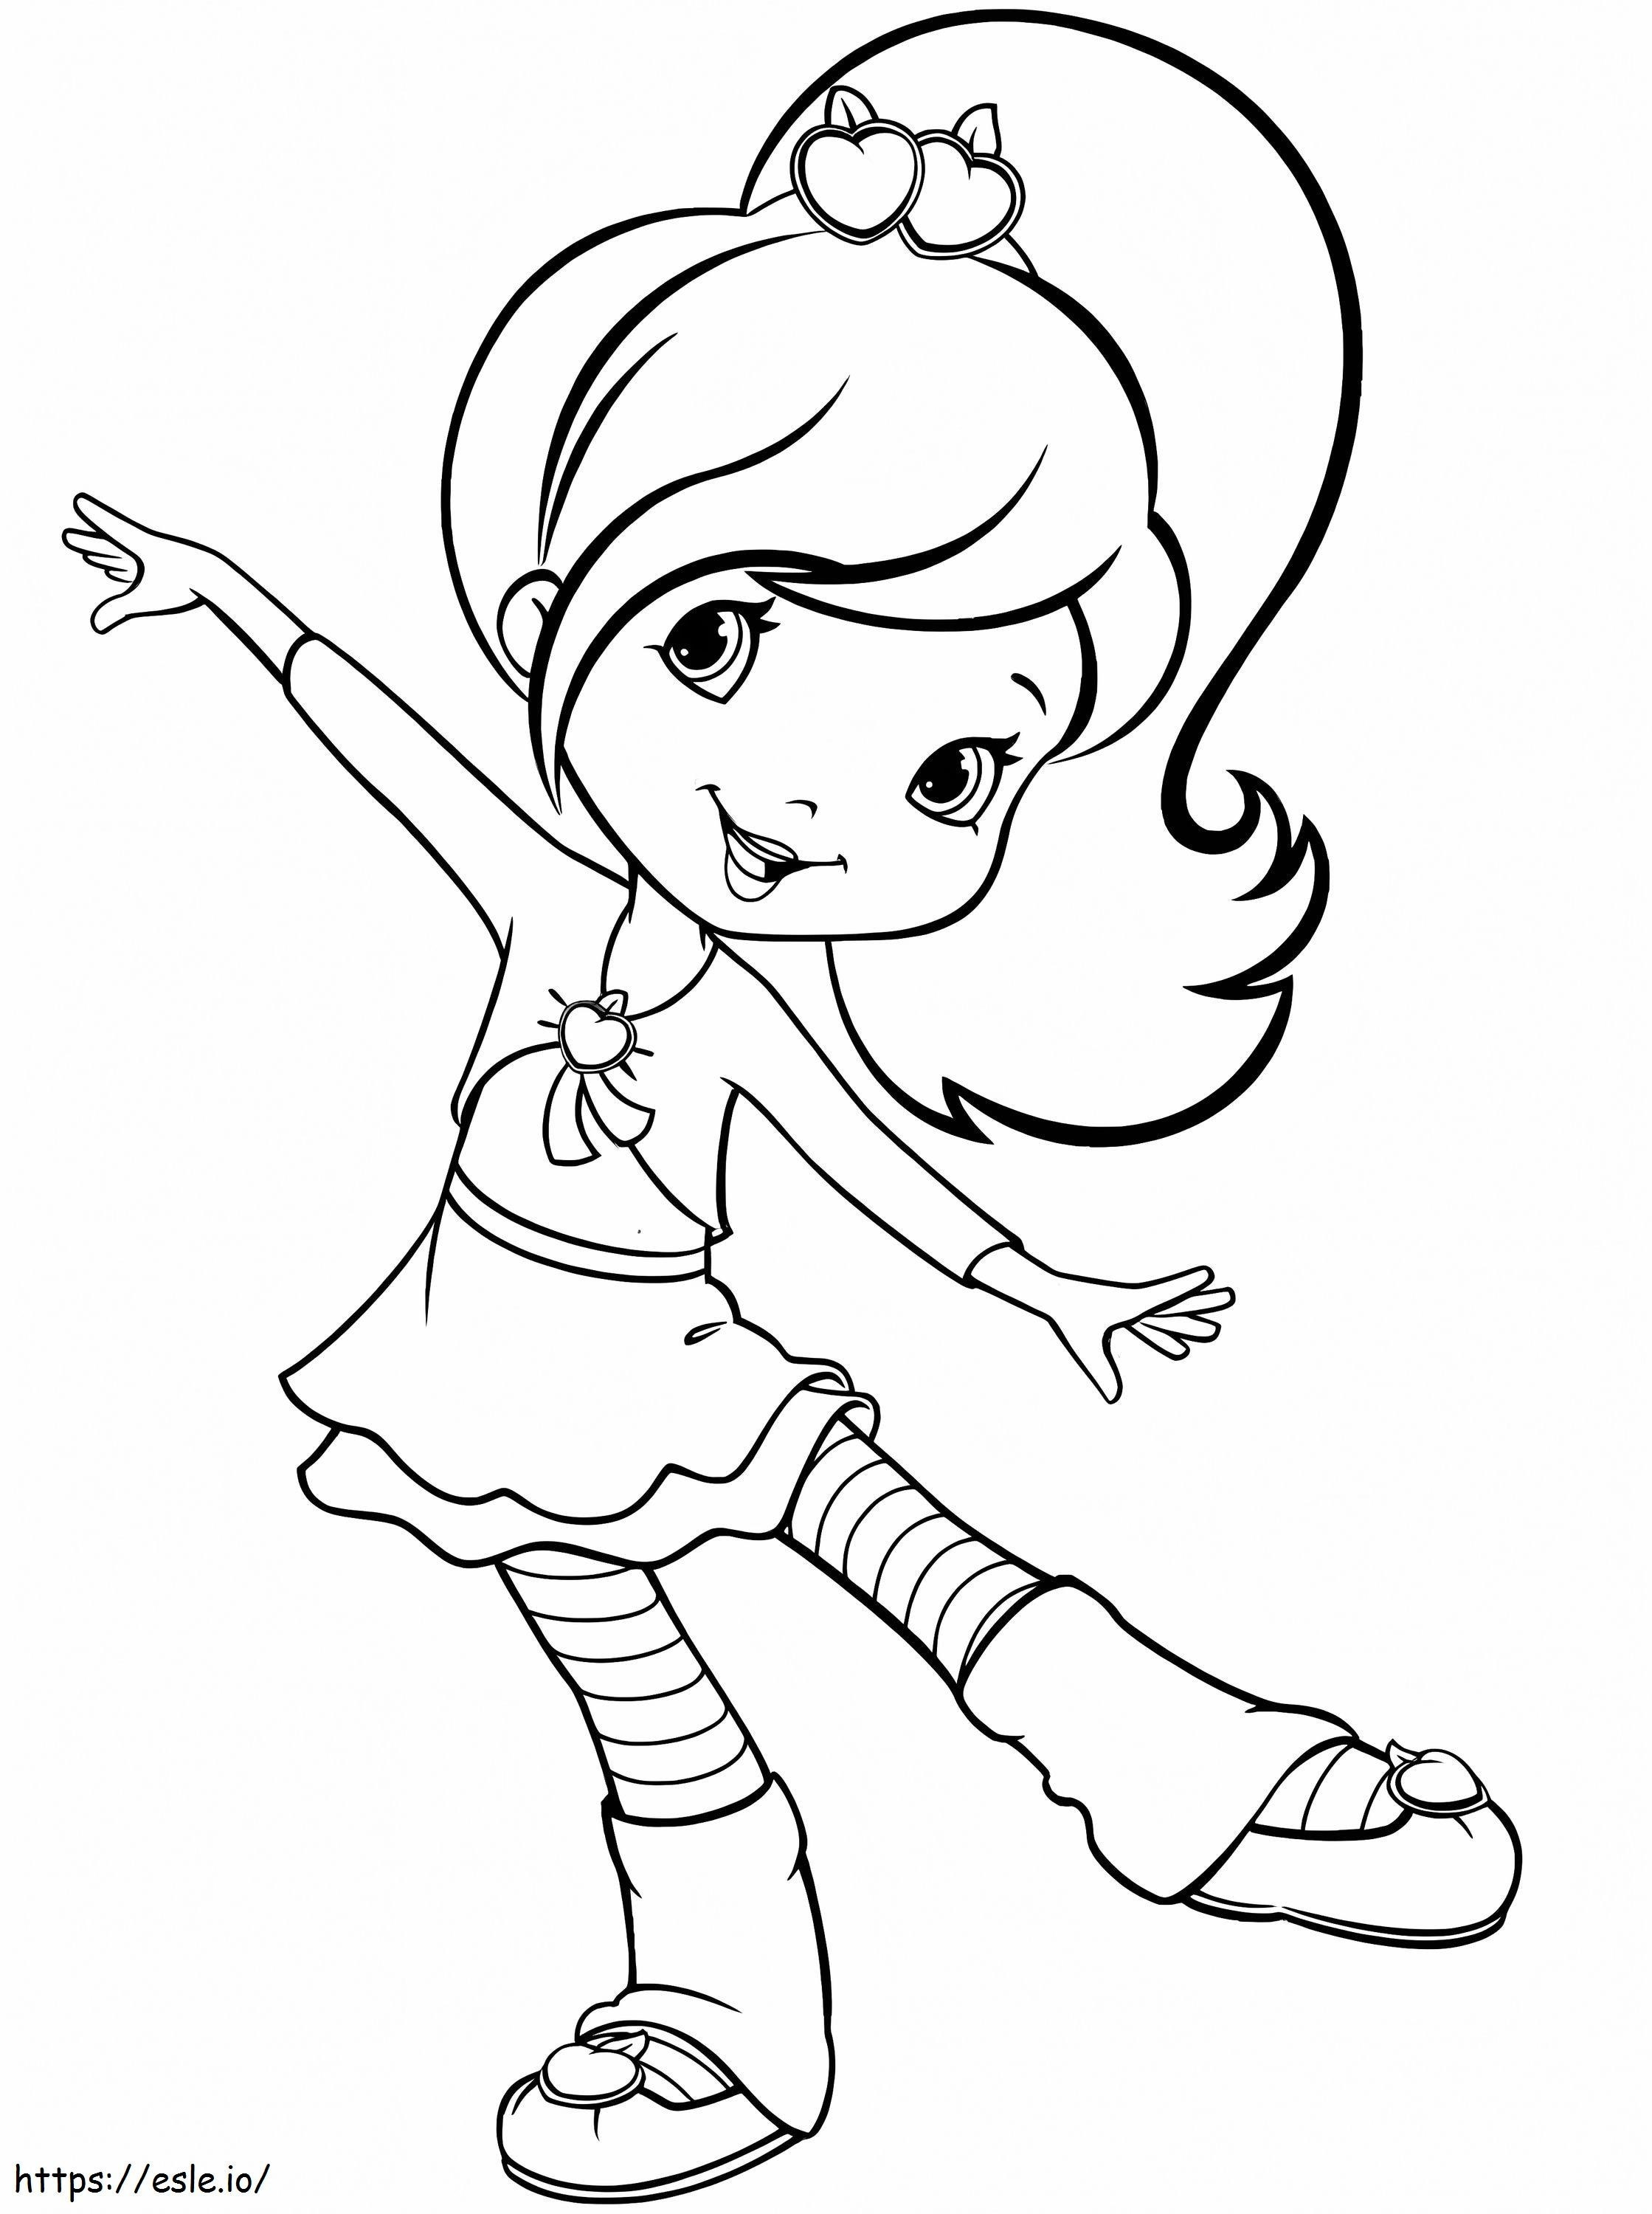 Plum Pudding coloring page